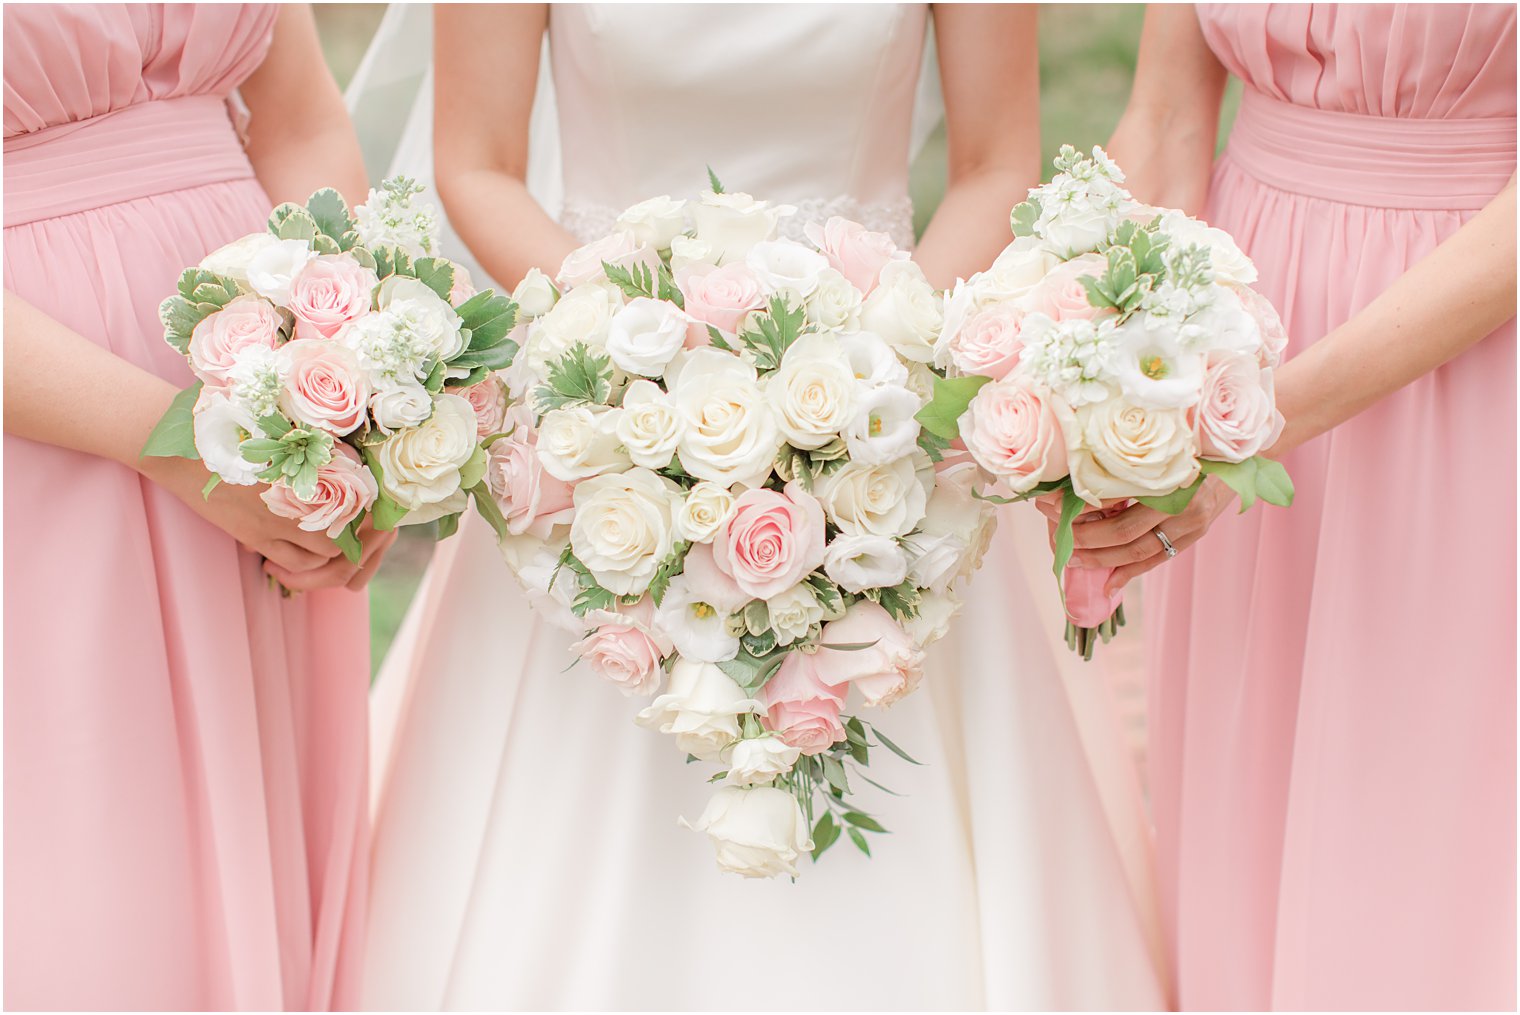 Bouquets by Blooming Brides Florist